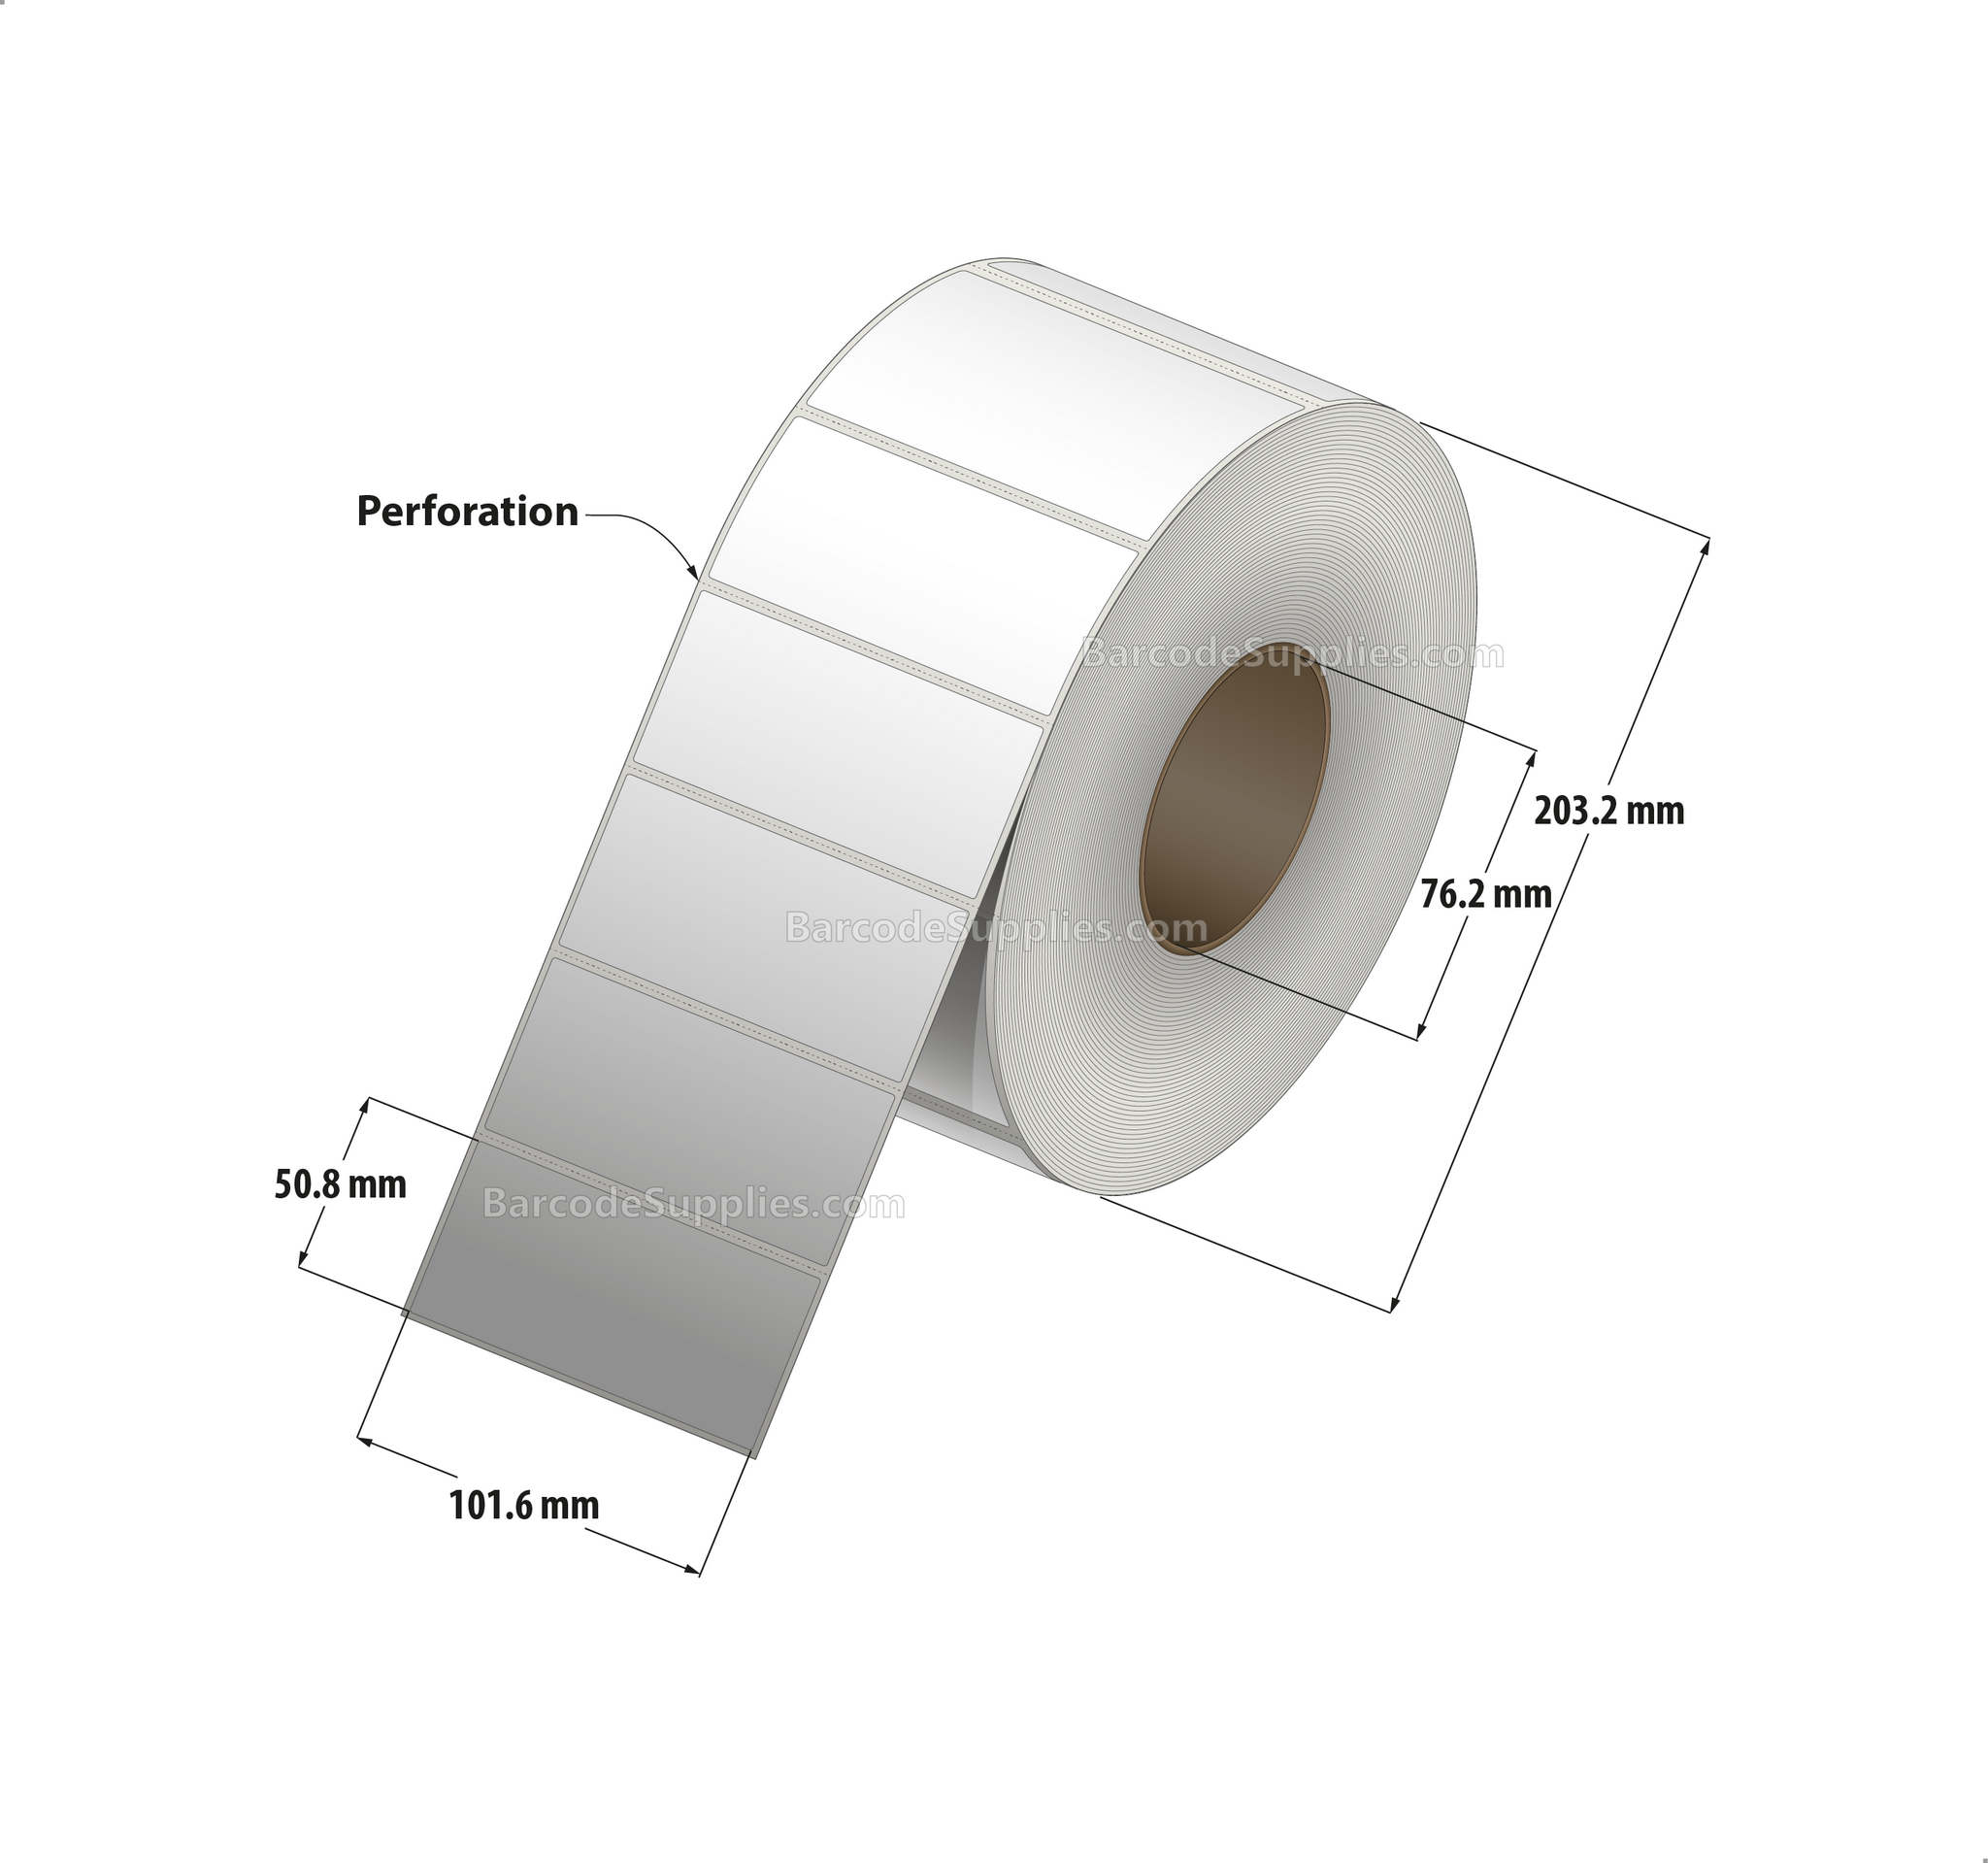 4 x 2 Thermal Transfer White Labels With Permanent Adhesive - Perforated - 2730 Labels Per Roll - Carton Of 4 Rolls - 10920 Labels Total - MPN: RSP-4-2-2730-3